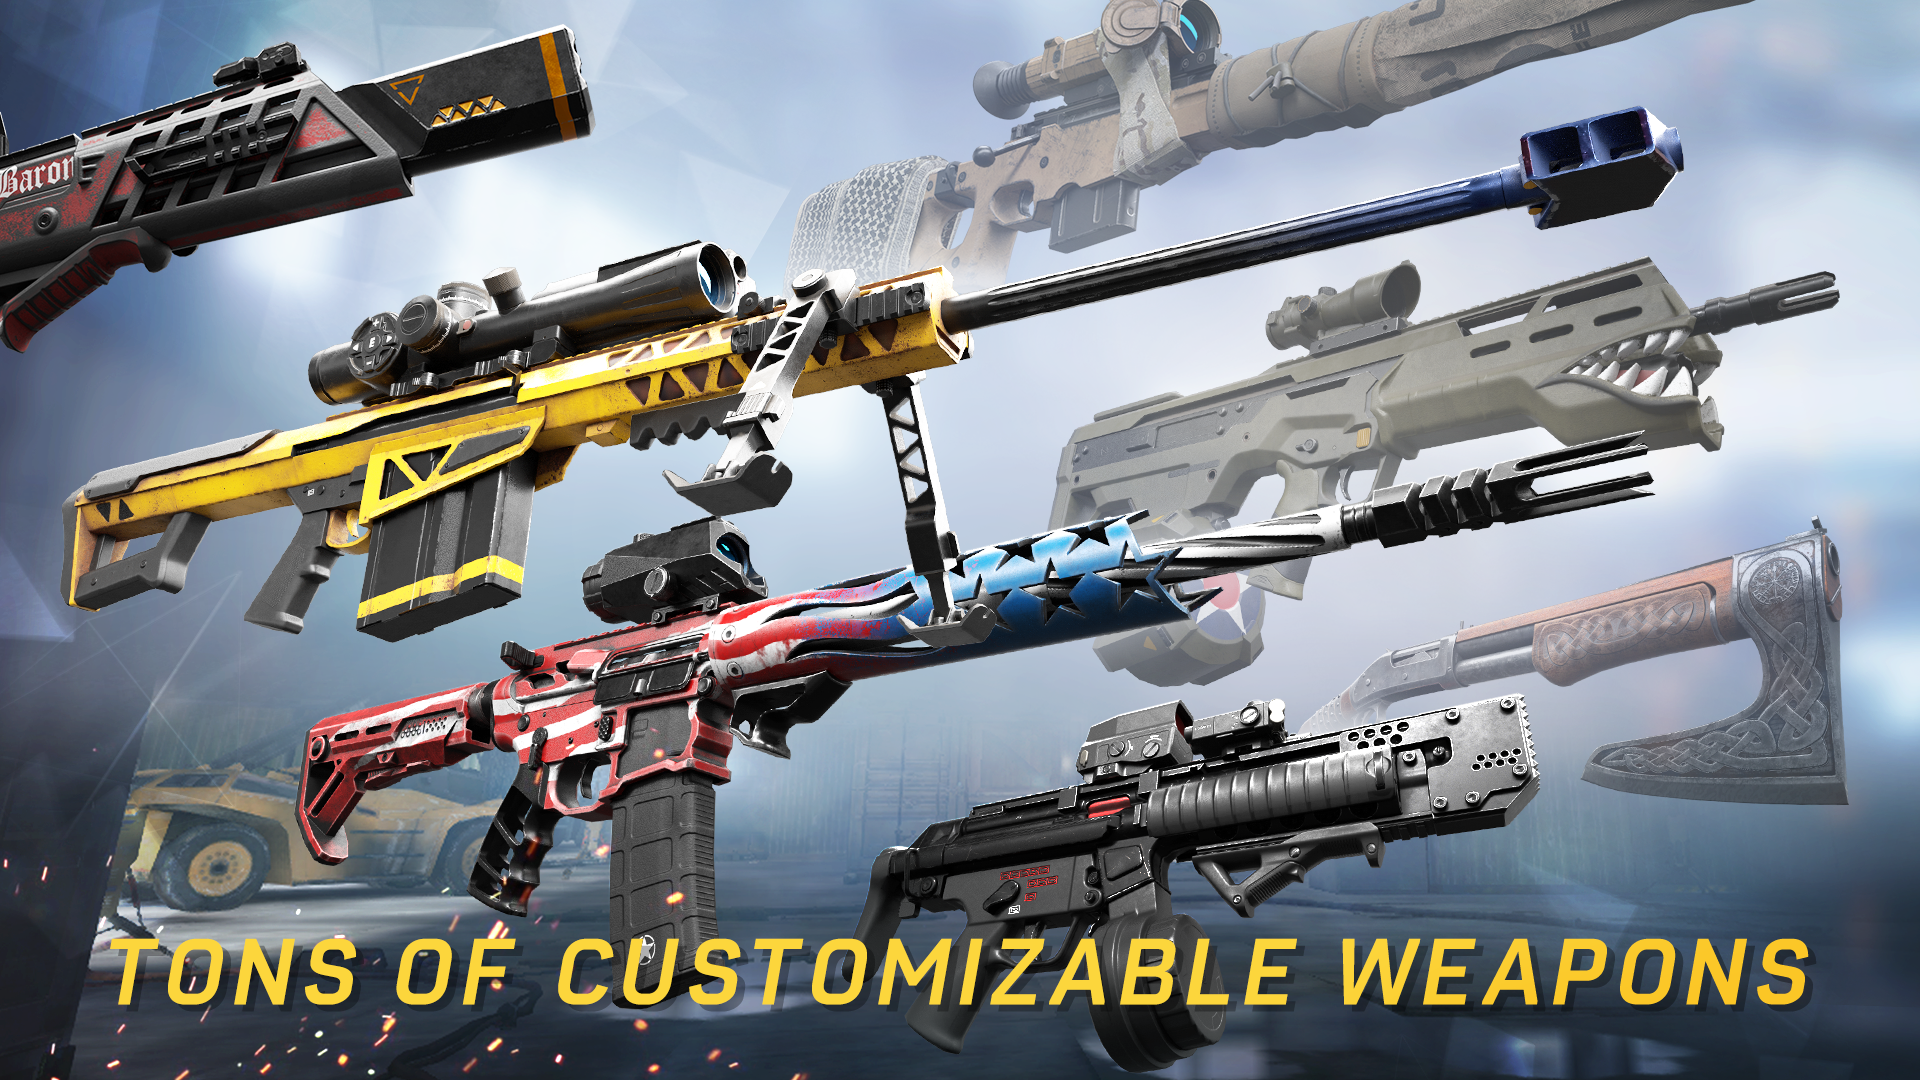 WARFACE: Global Operations Free-to-Play First-Person Shooter Available Now Globally for Mobile